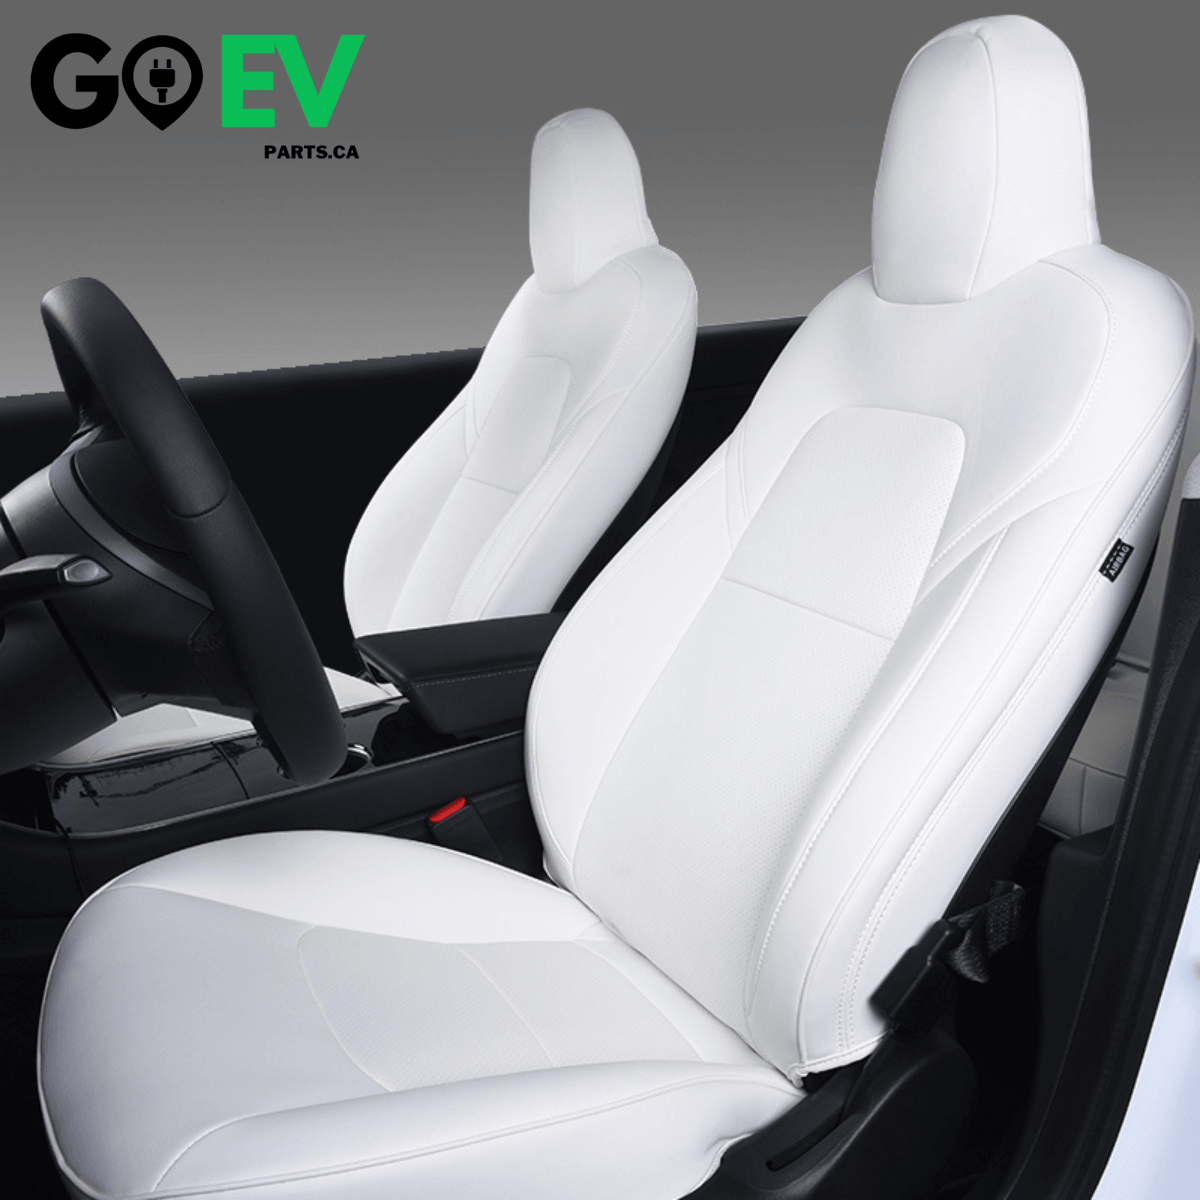 Model Y: PU Leather Full Seat Cover